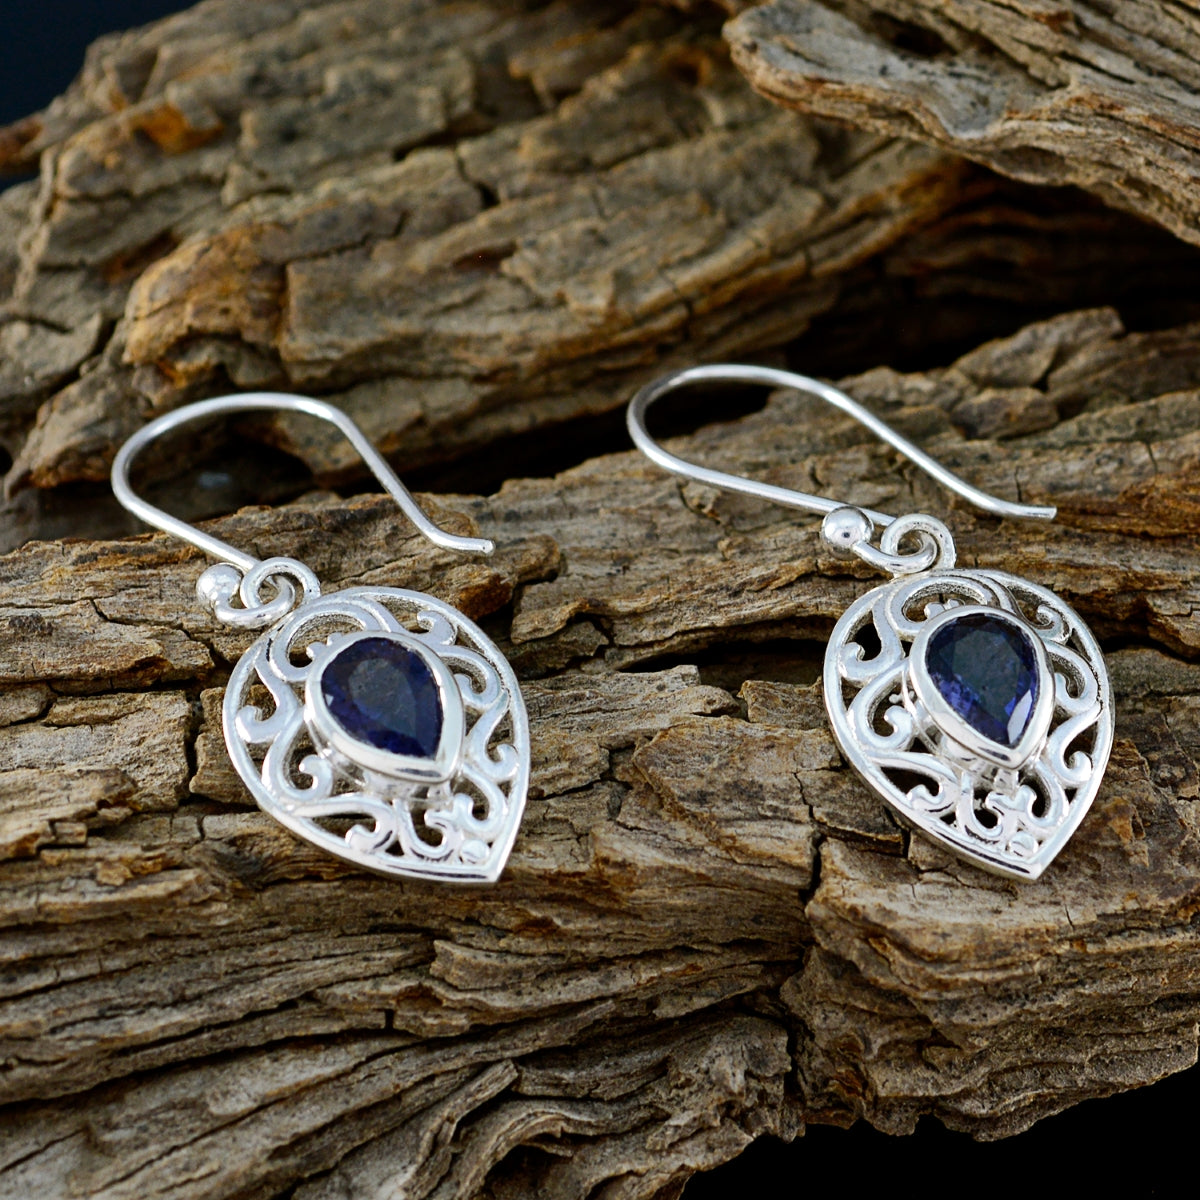 Riyo Natural Gemstone Pear Faceted Nevy Blue Iolite Silver Earrings gift for boxing day